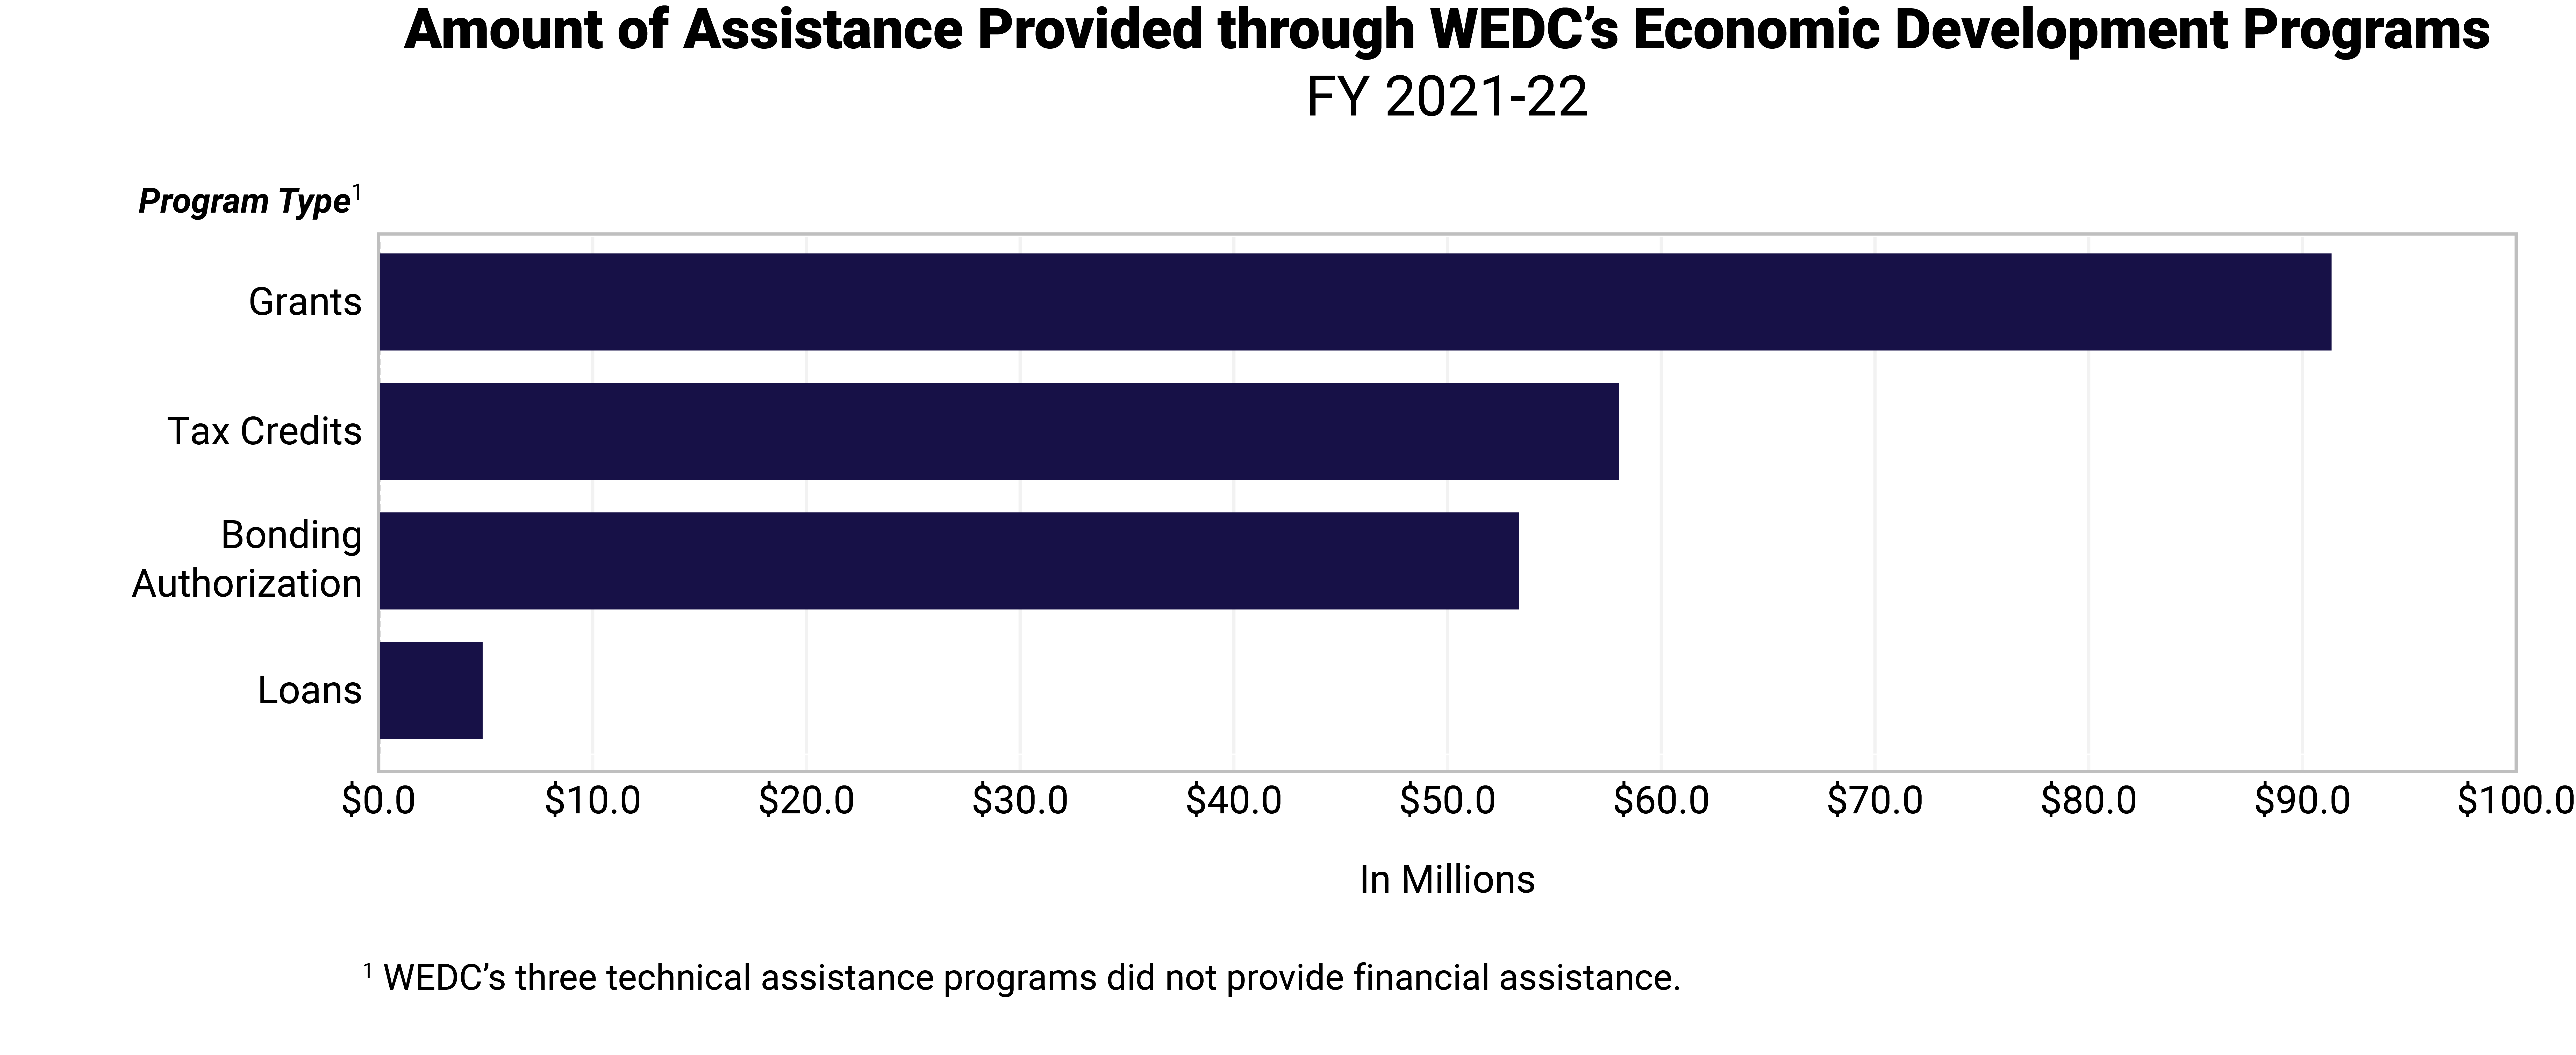 Bar graph showing assistance provided through WEDC's Economic Development Programs